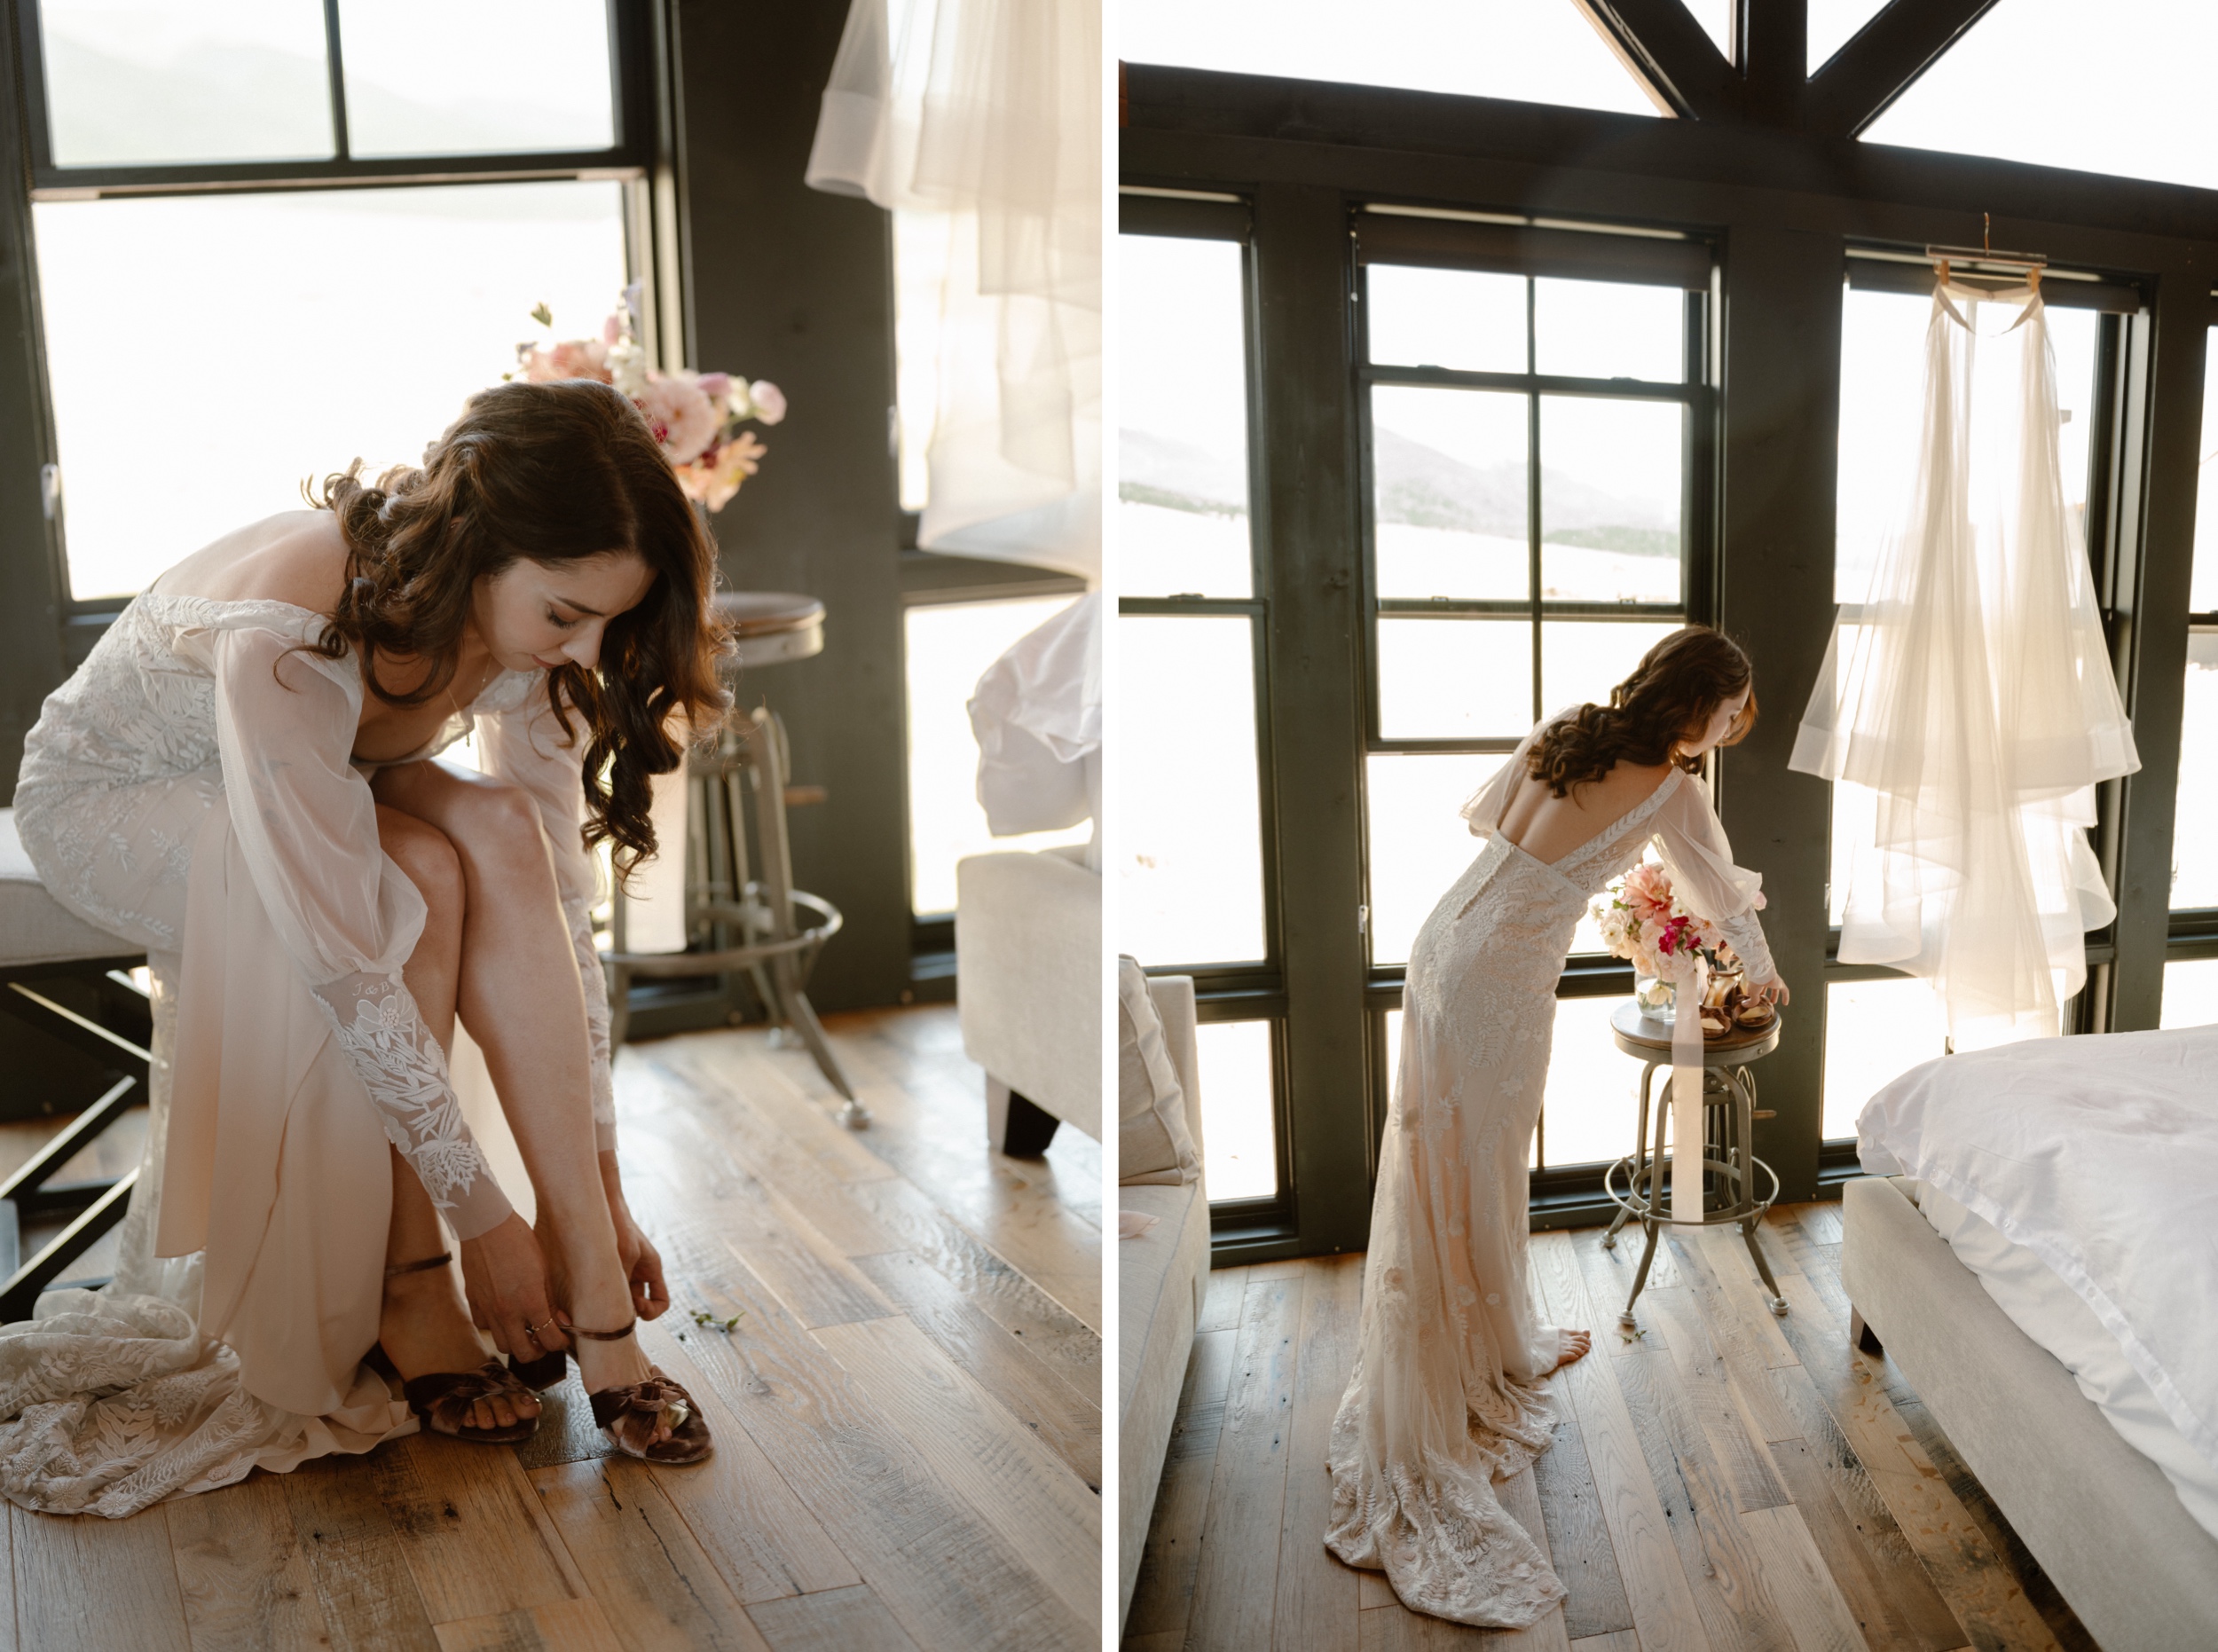 Two color photos side by side showcasing a bride getting her shoes and other accessories on for her wedding. Photo by Ashley Joyce.